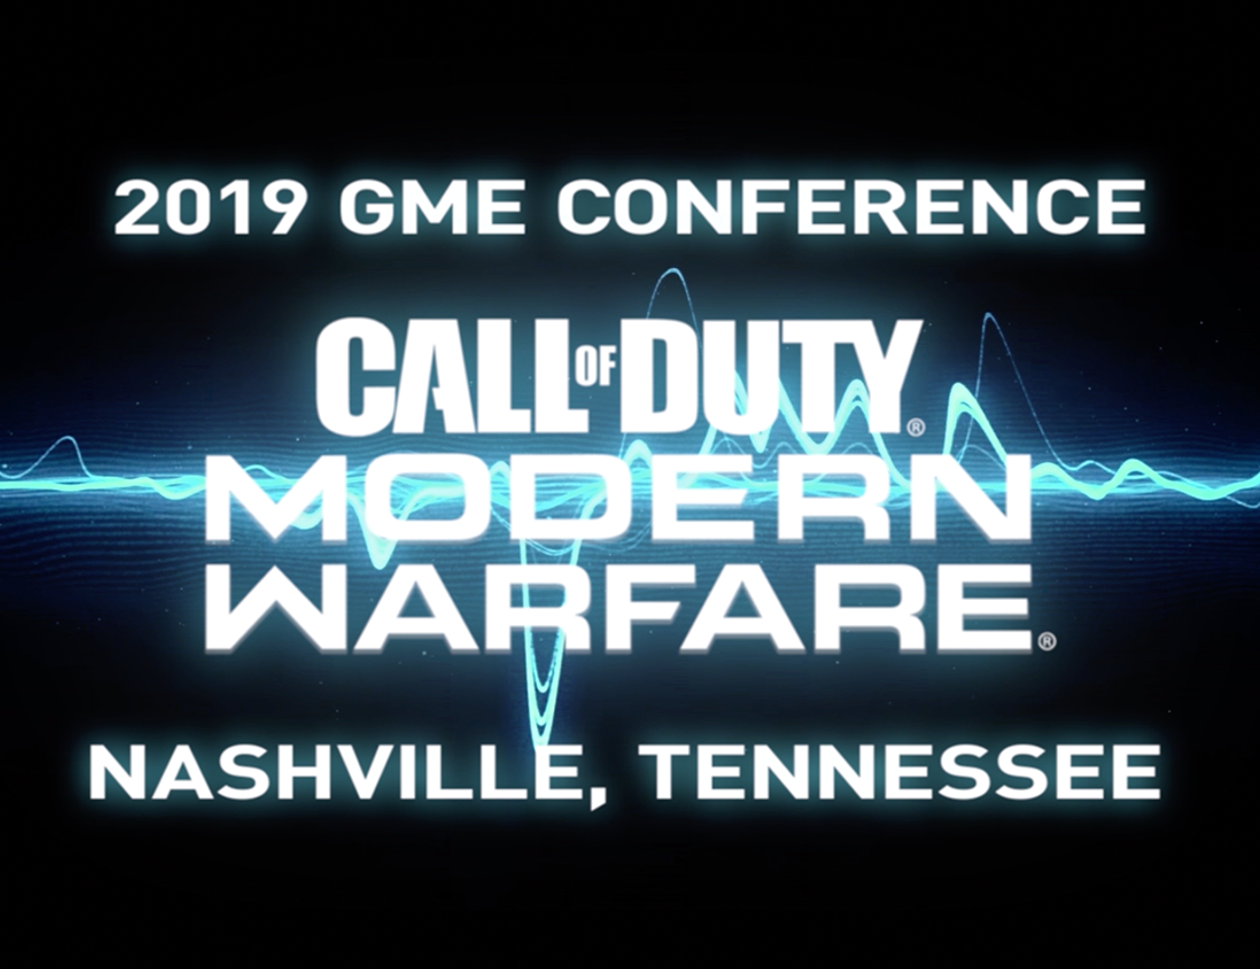 900lbs Partners With Activision For GME Conference 2019